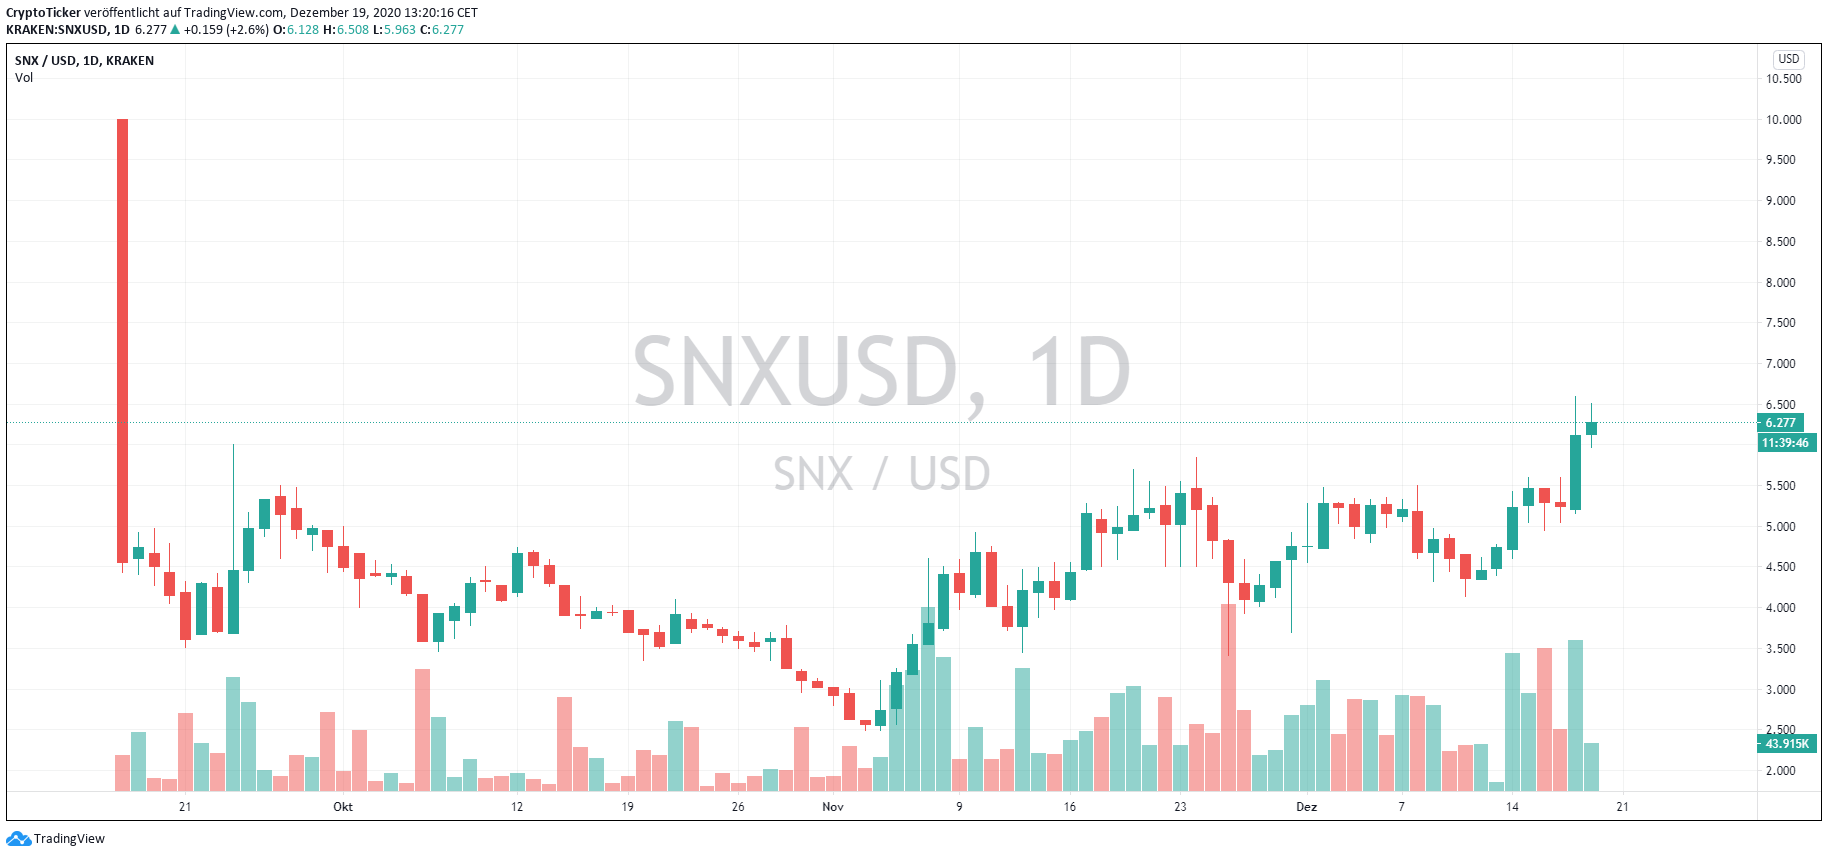 SNX/USD 1-Day chart - a heavy fall in prices since inception